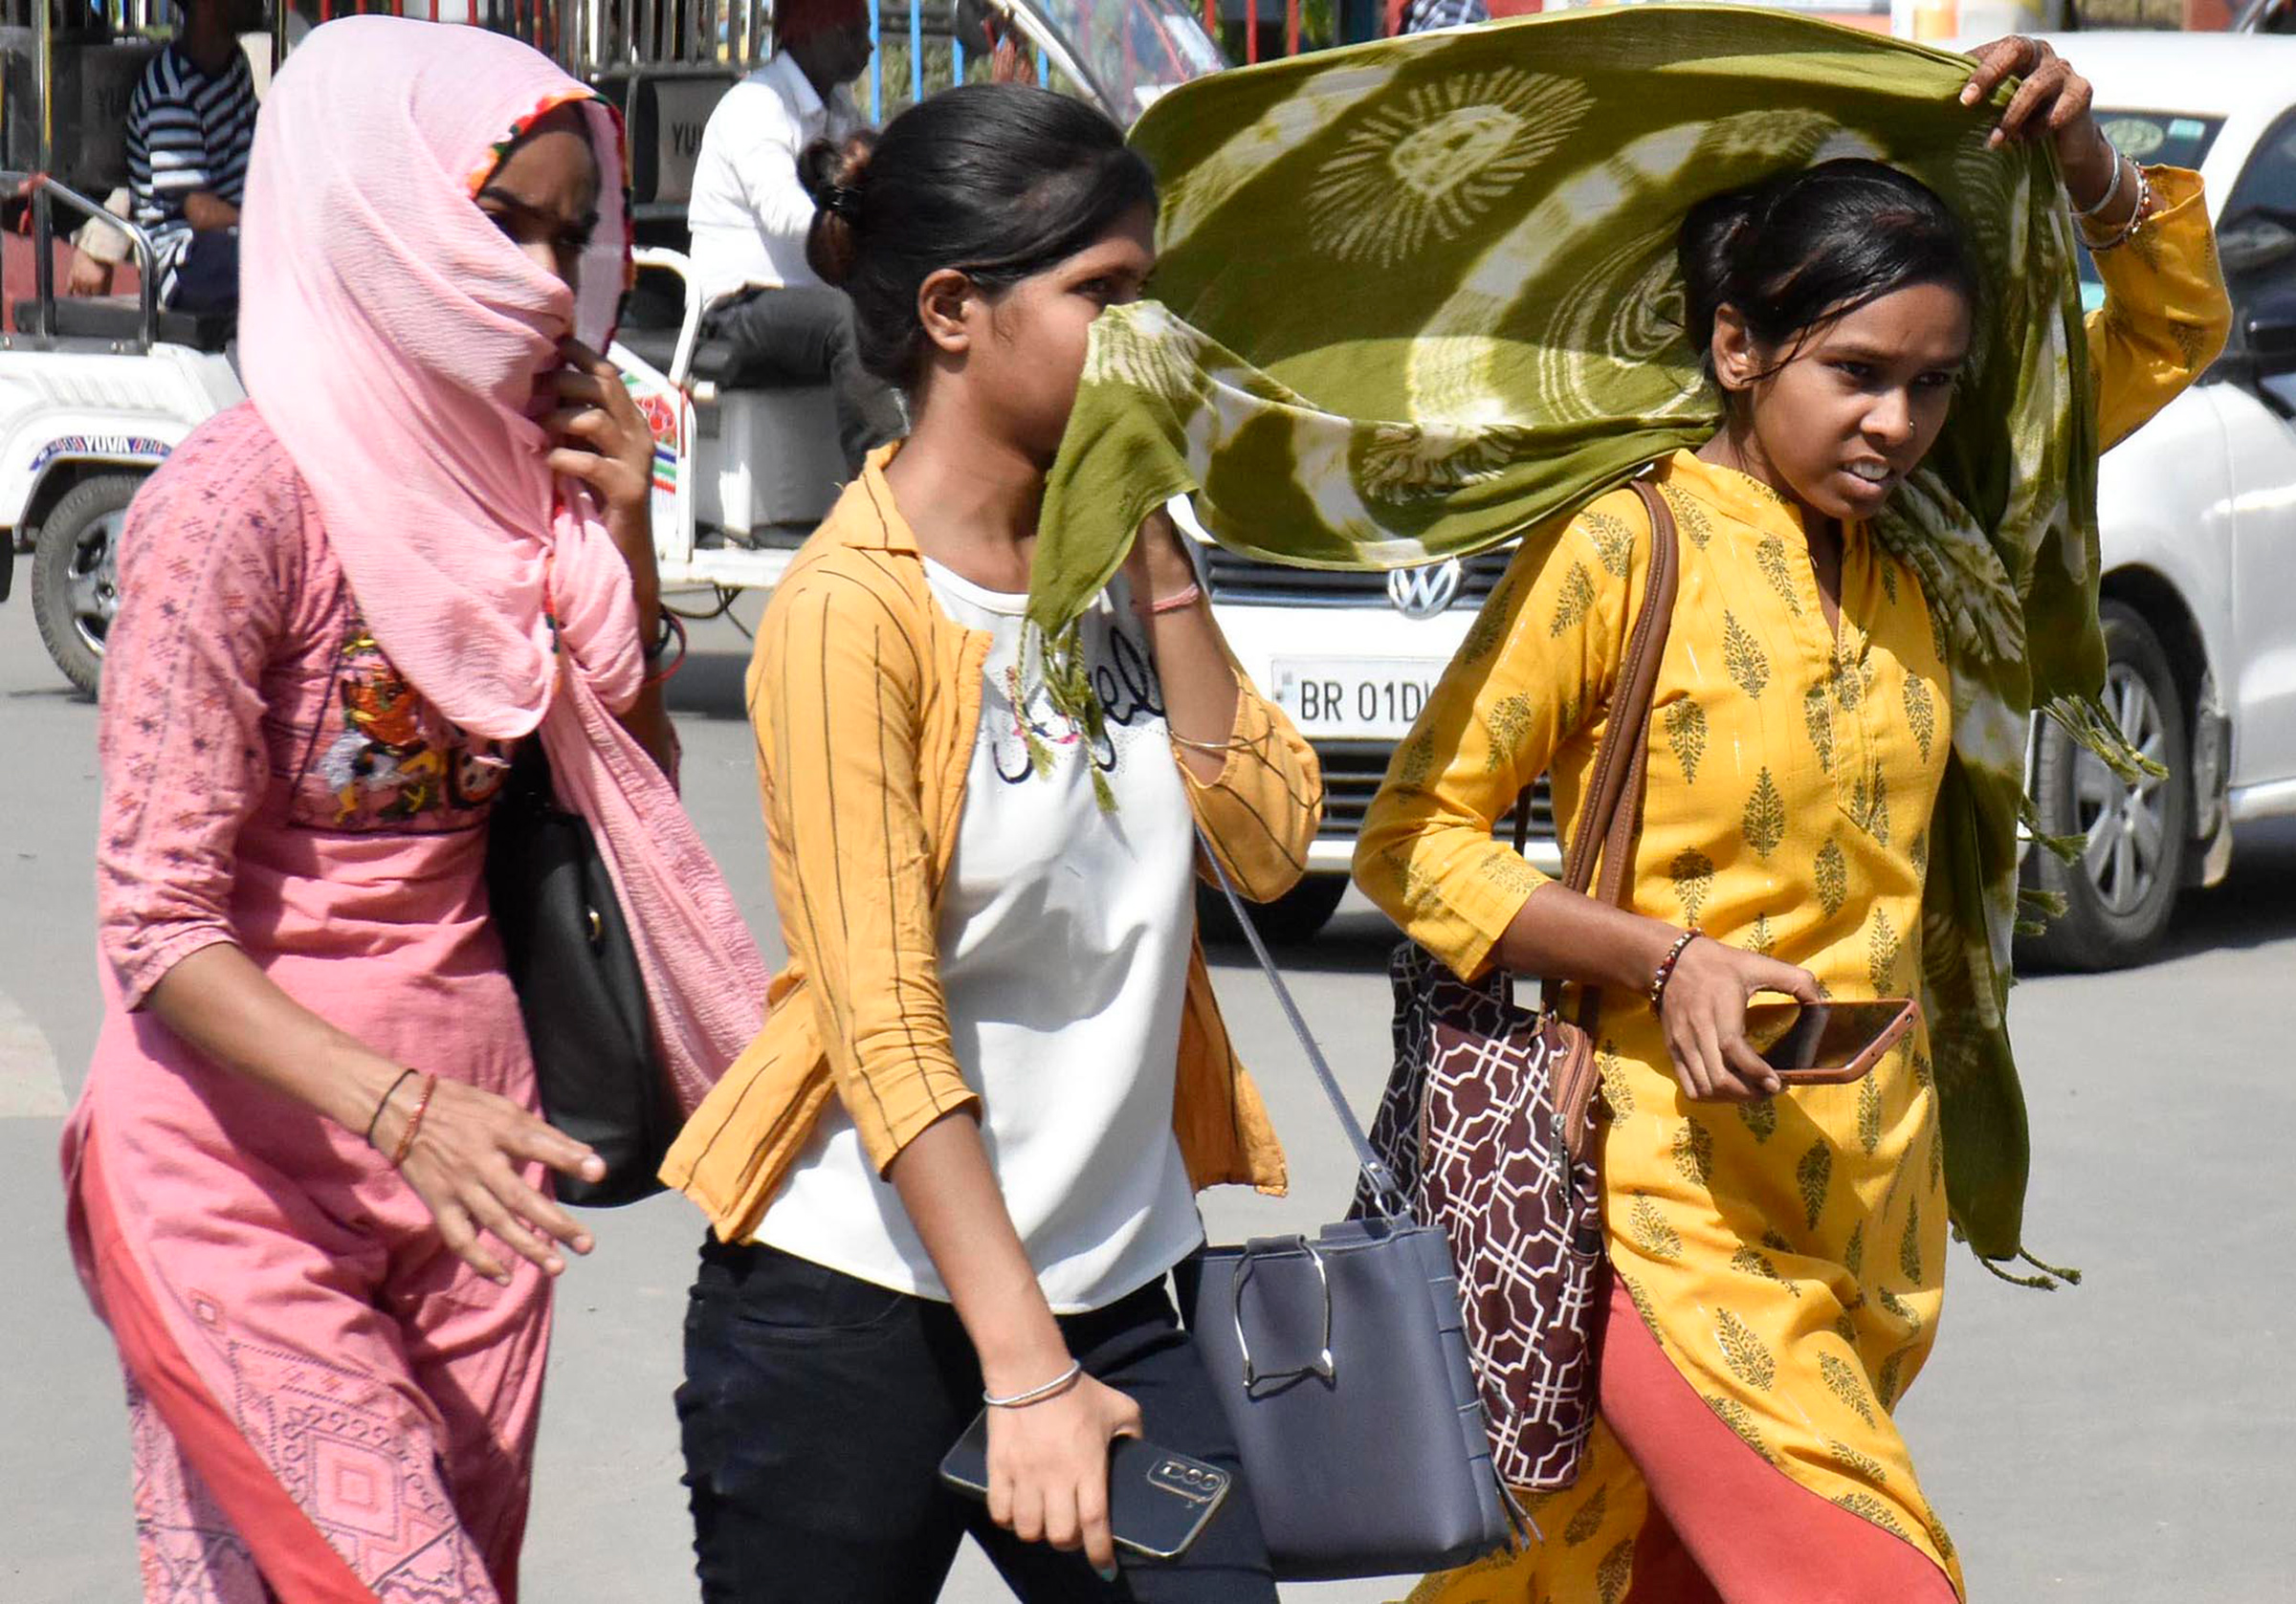 Women covering their face with dupatta during a hot summer day at Kargil Chowk, in Patna, India, on June 4. (Santosh Kumar—Hindustan Times/Getty Images)